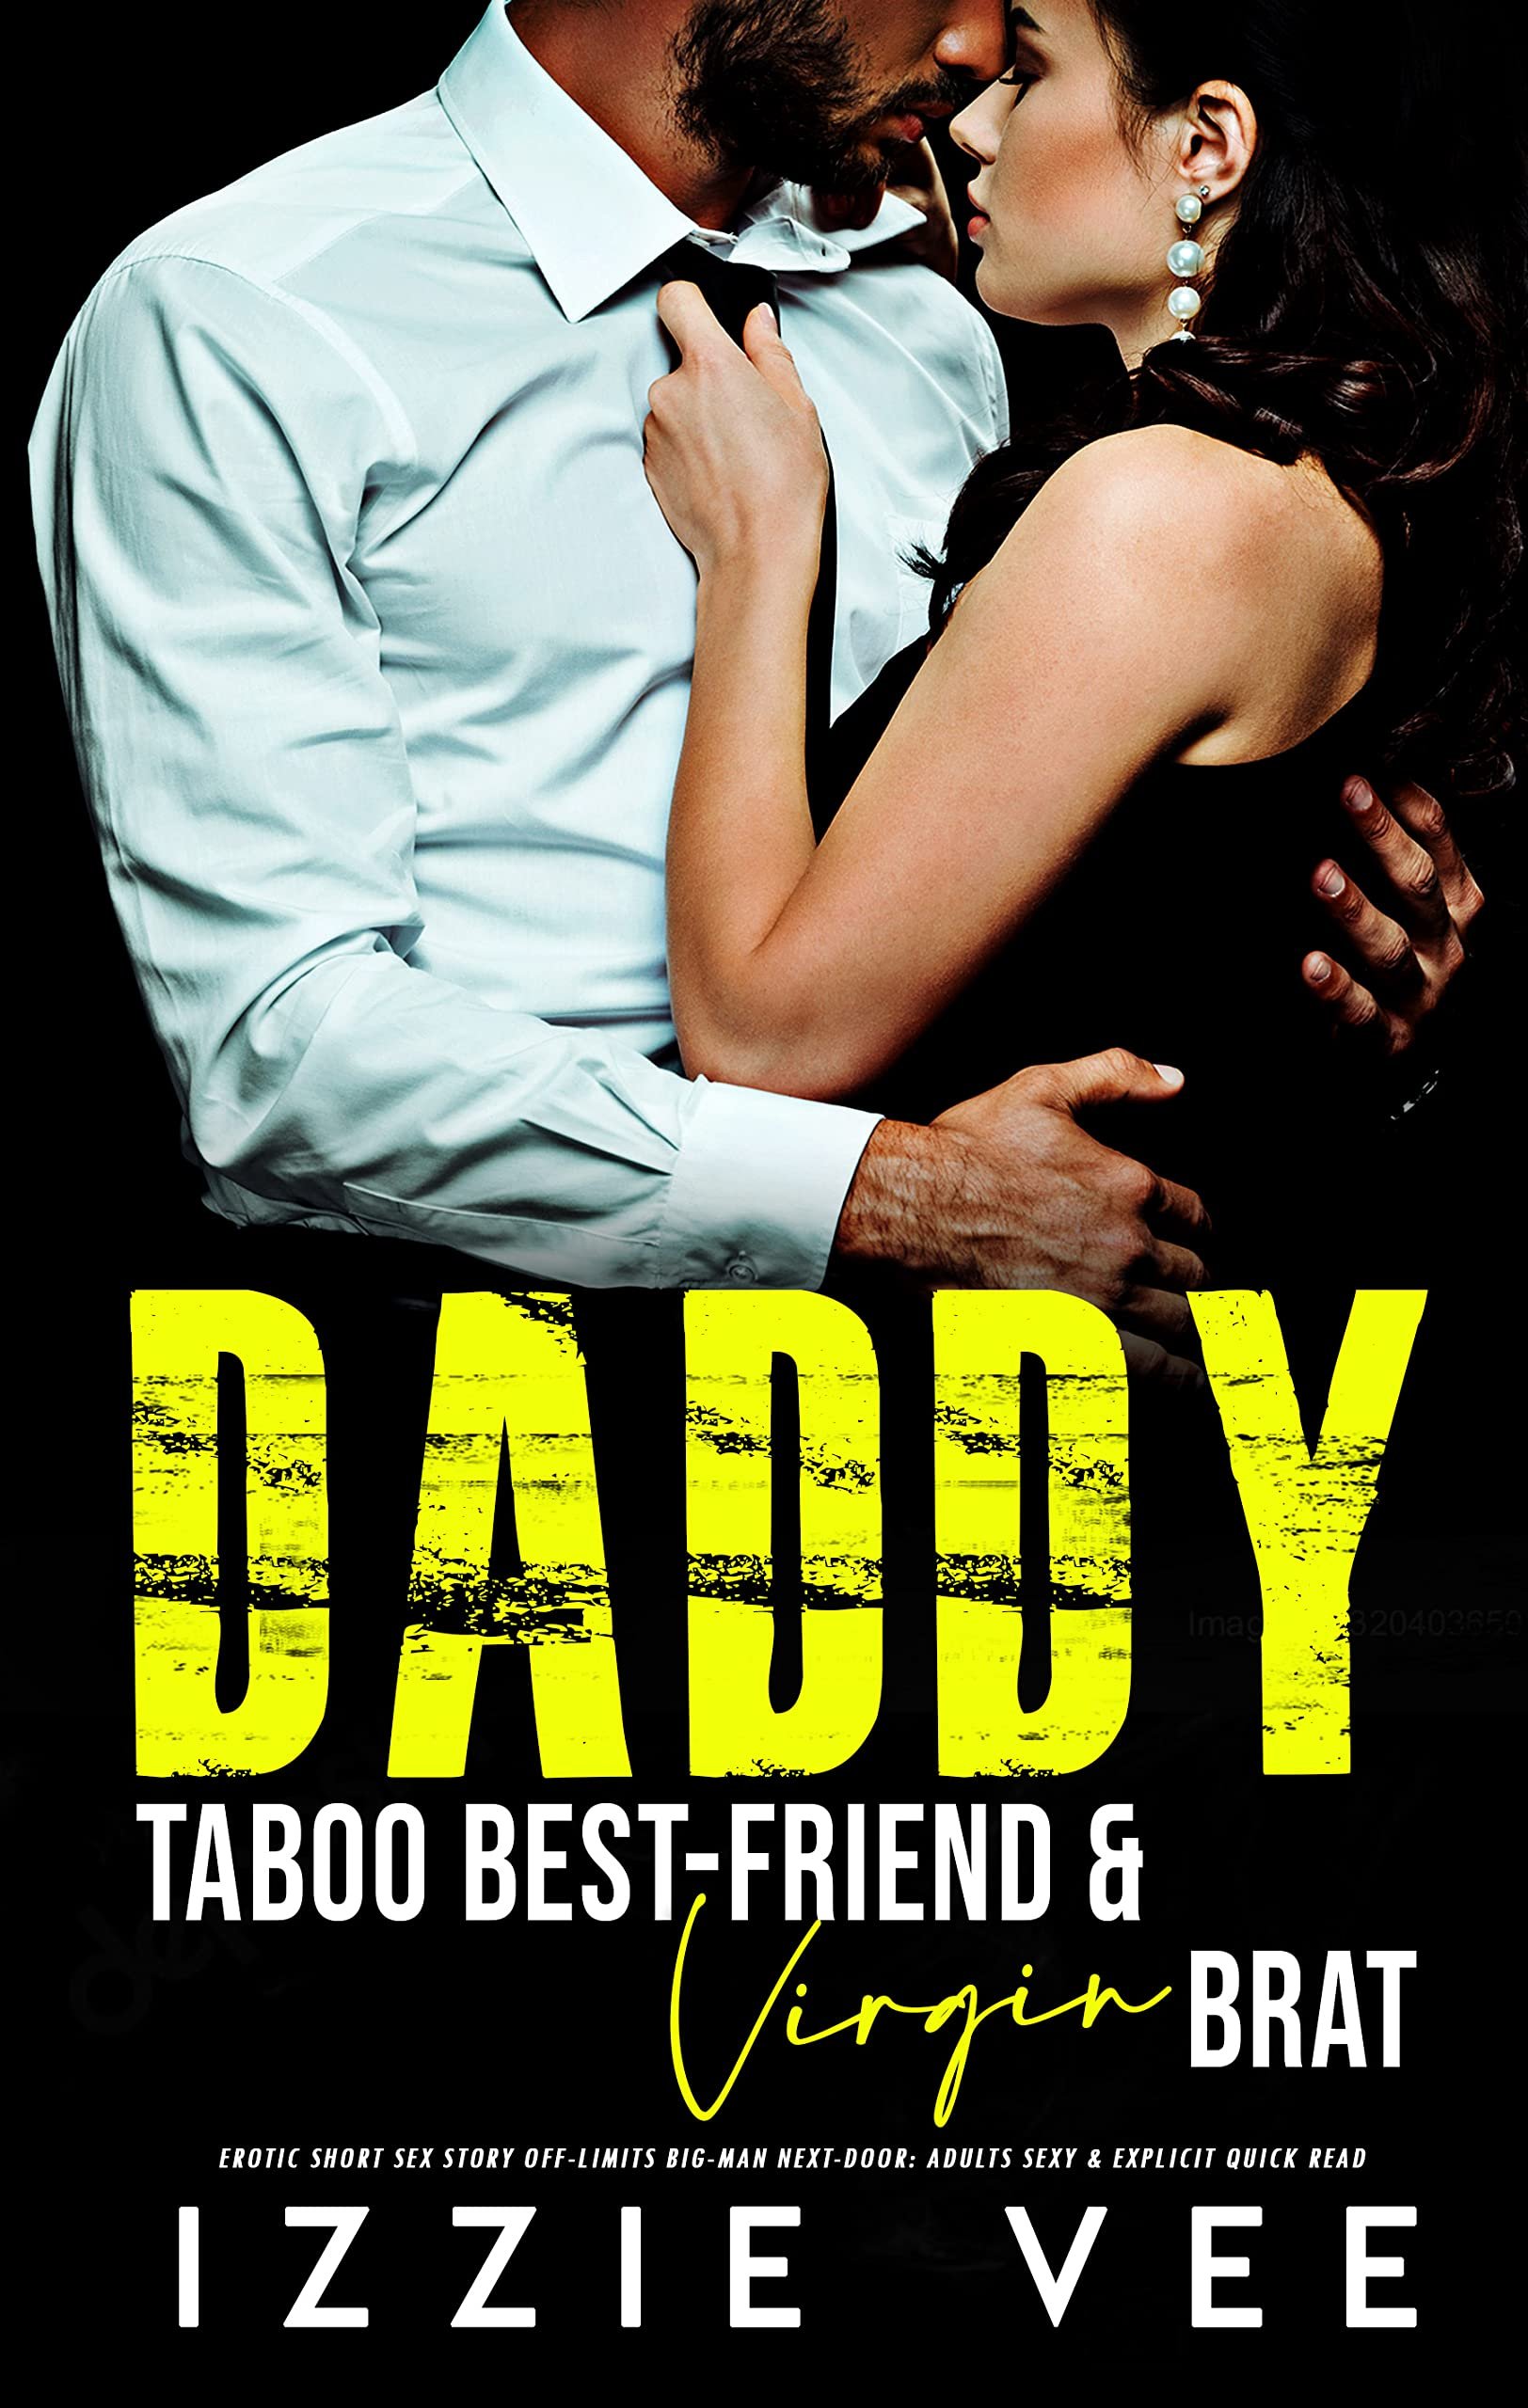 Daddy's Taboo Best-Friend & Virgin Brat: Erotic Short Sex Story: Off-Limits Big-Man Next-Door: Adults Sexy & Explicit Quick Read (Older Men Younger Women, MFM Threesome Menage Book 2) Cover